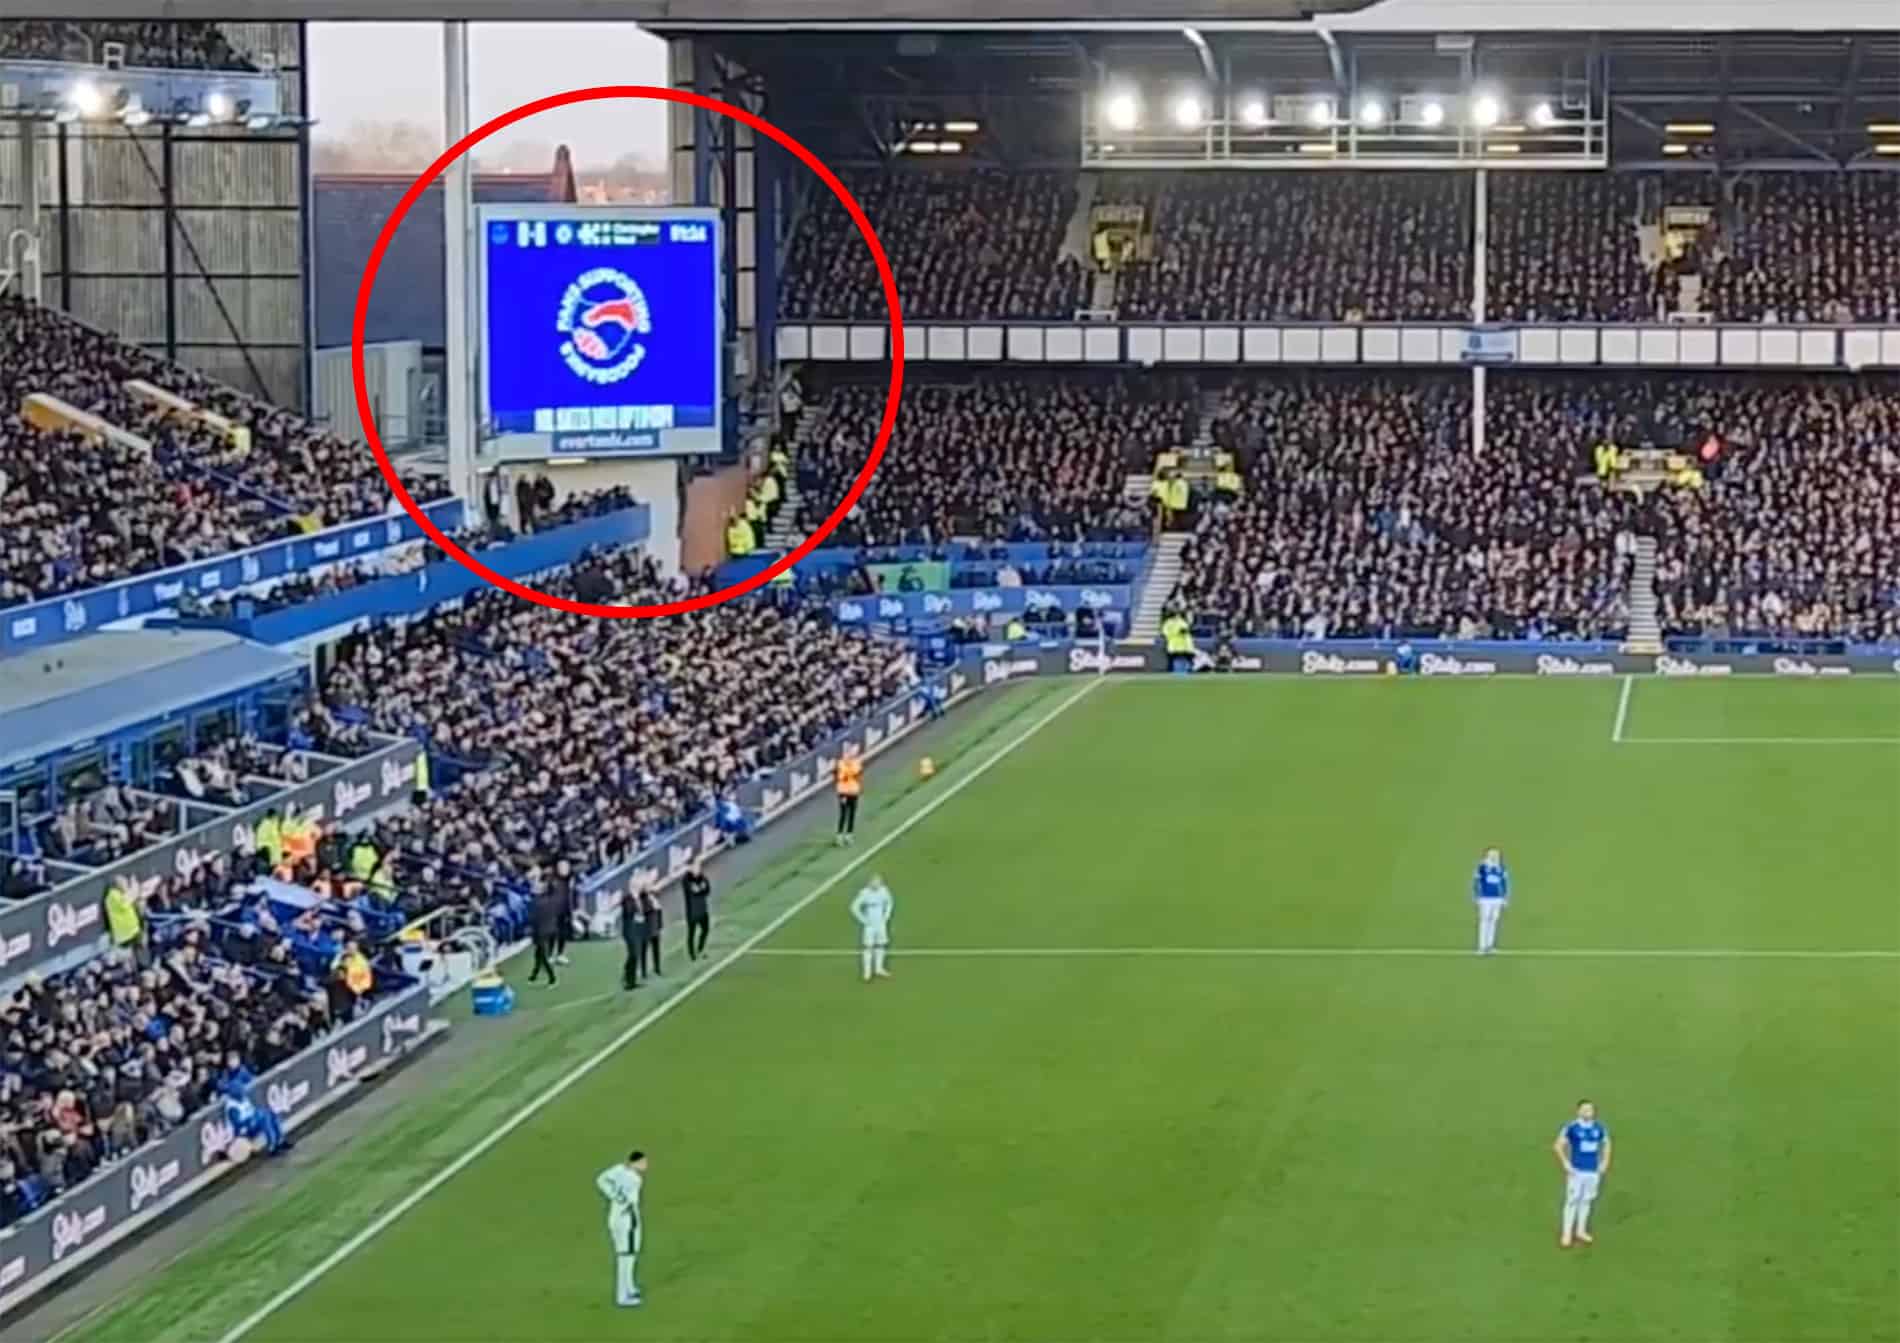 Everton responds to Chelsea poverty chants in best possible way